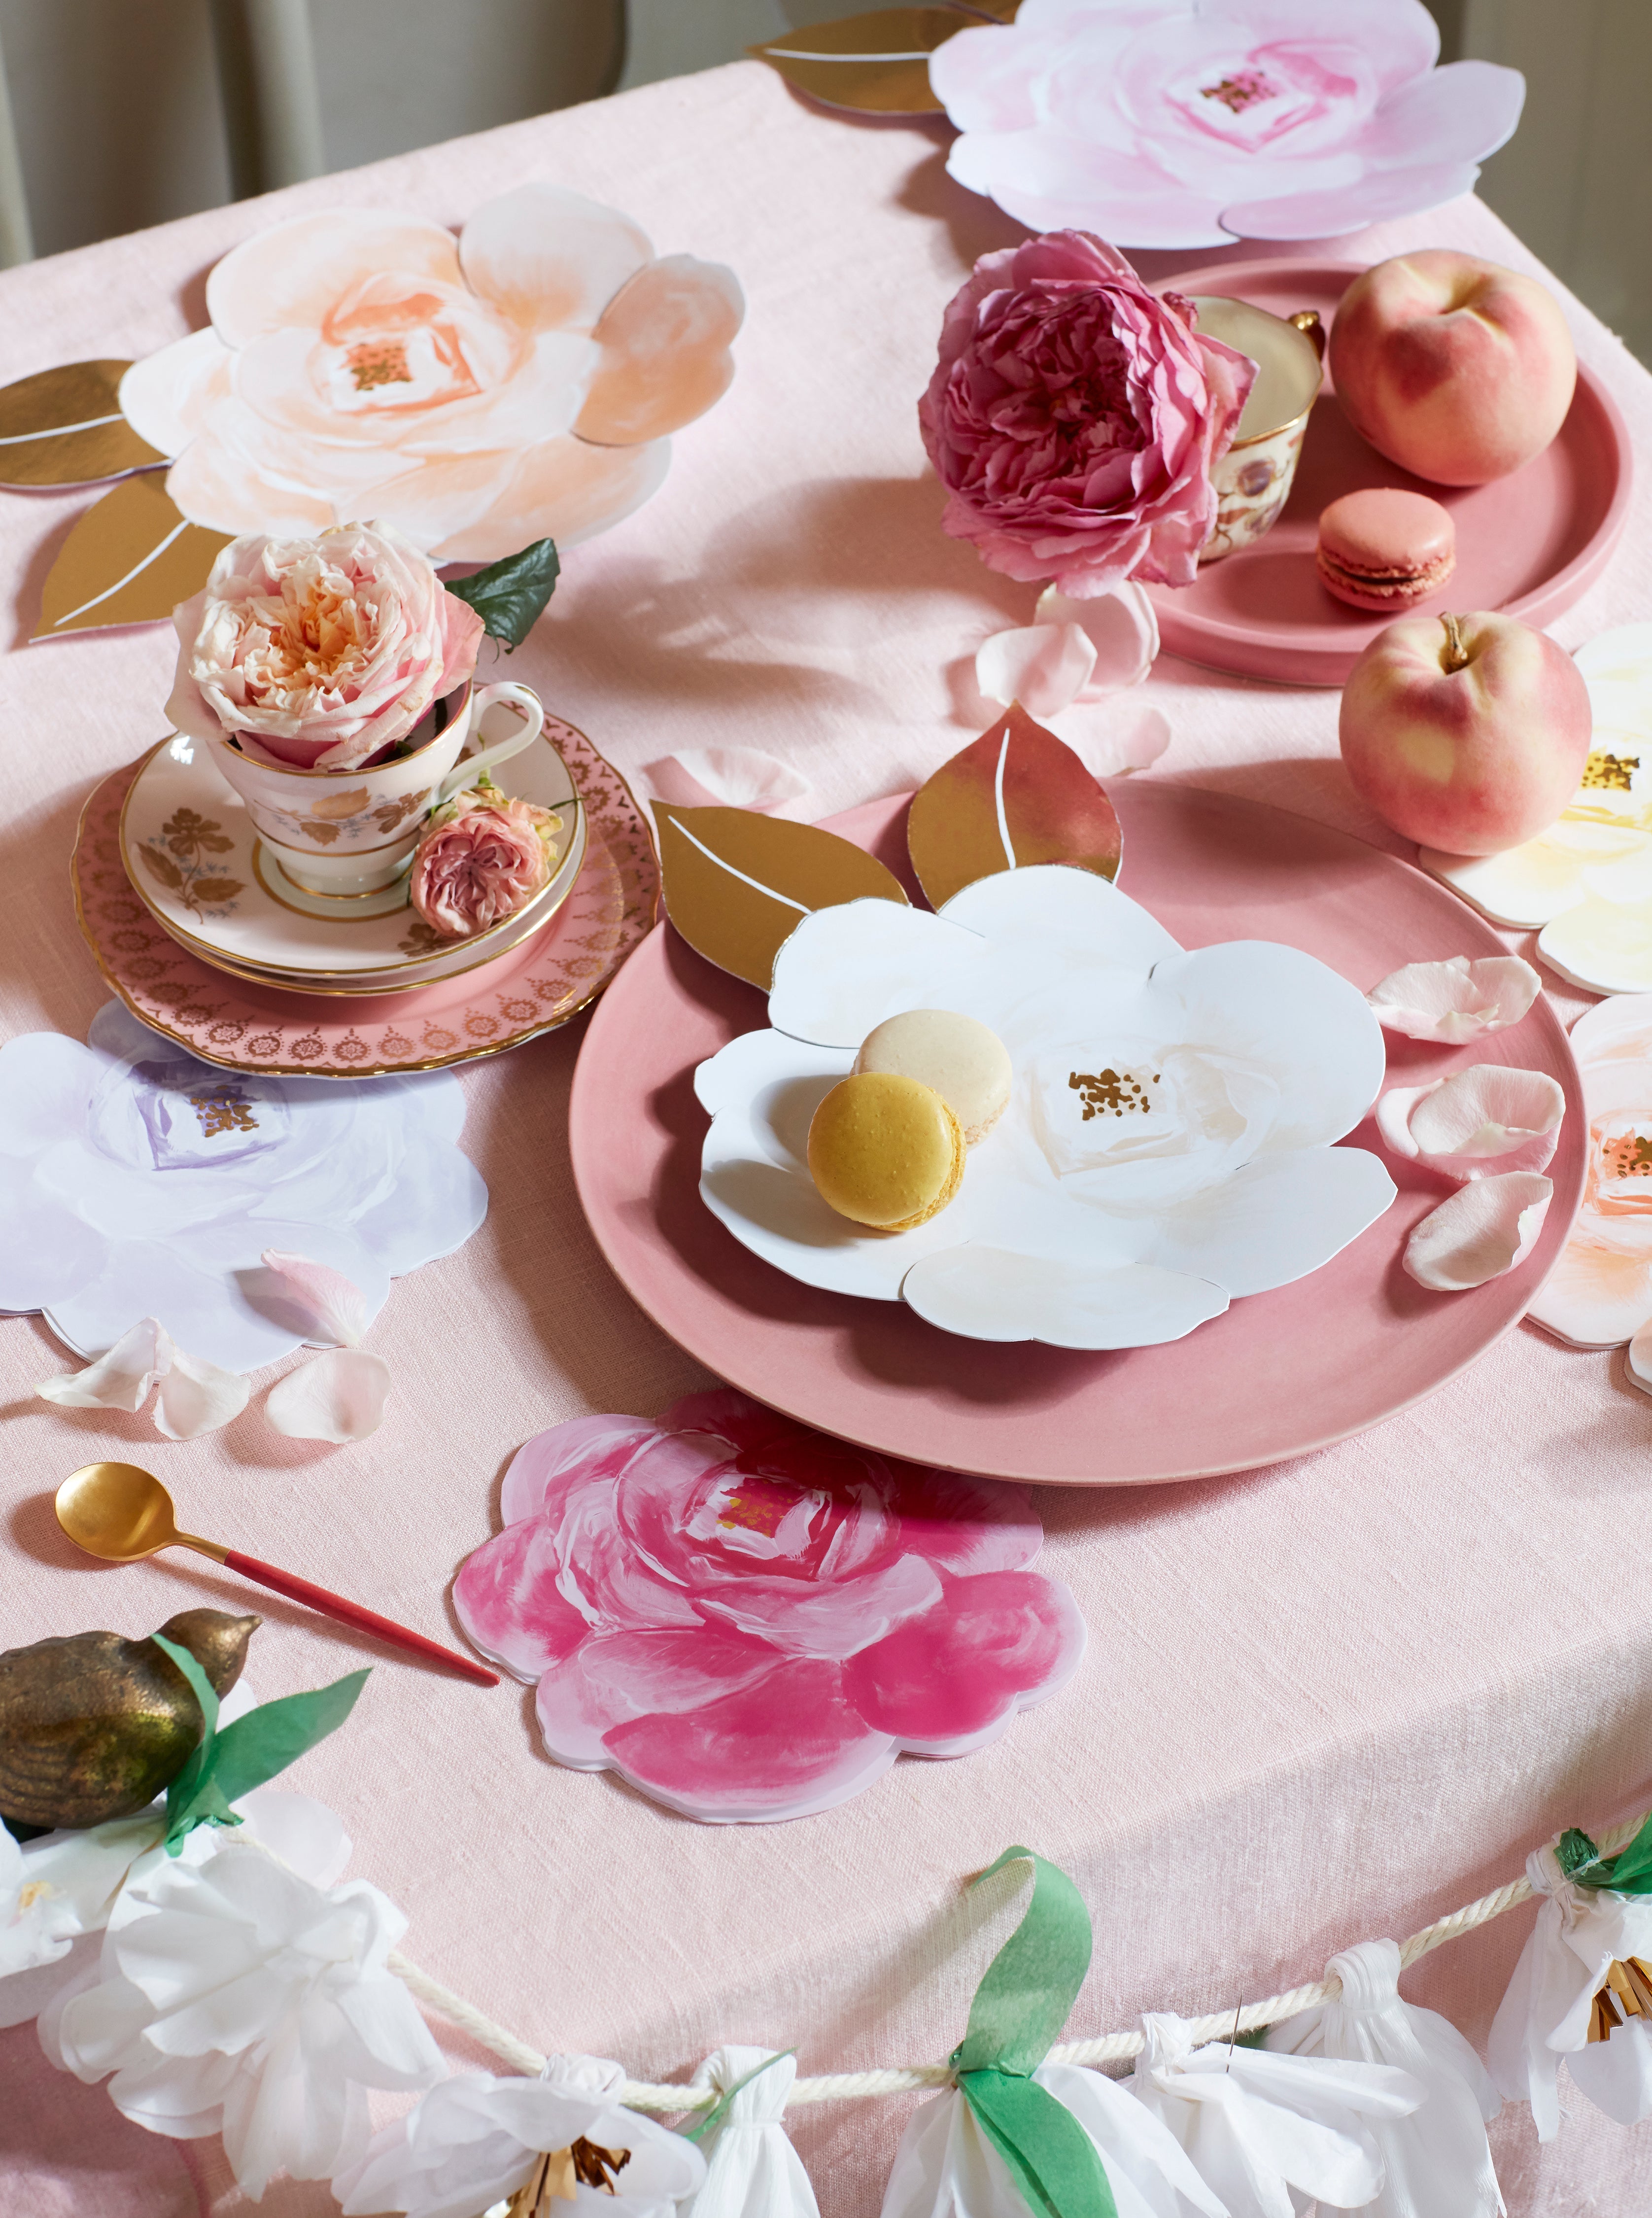 Spring Showers Bring May Flowers! Find everything to throw a gorgeous spring gathering, from tea party to bridal shower, Oh So Fancy Party has all the floral tableware, garlands, and decorations you need.